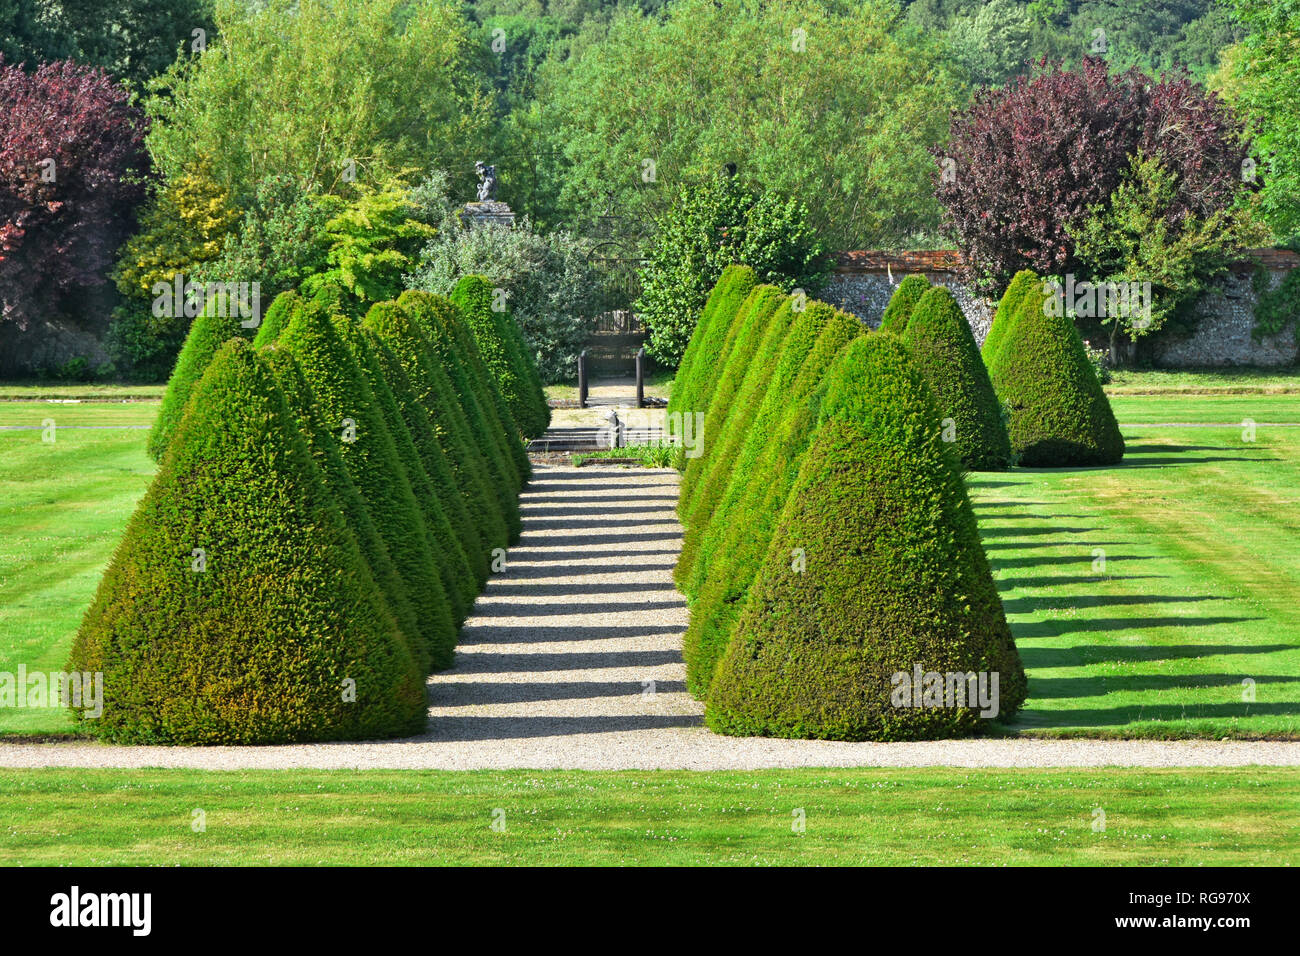 Elizabethan rural garden topiary & path in historic parklands & gardens rows of conifers casting shadows at Littlecote House in Wiltshire England UK Stock Photo